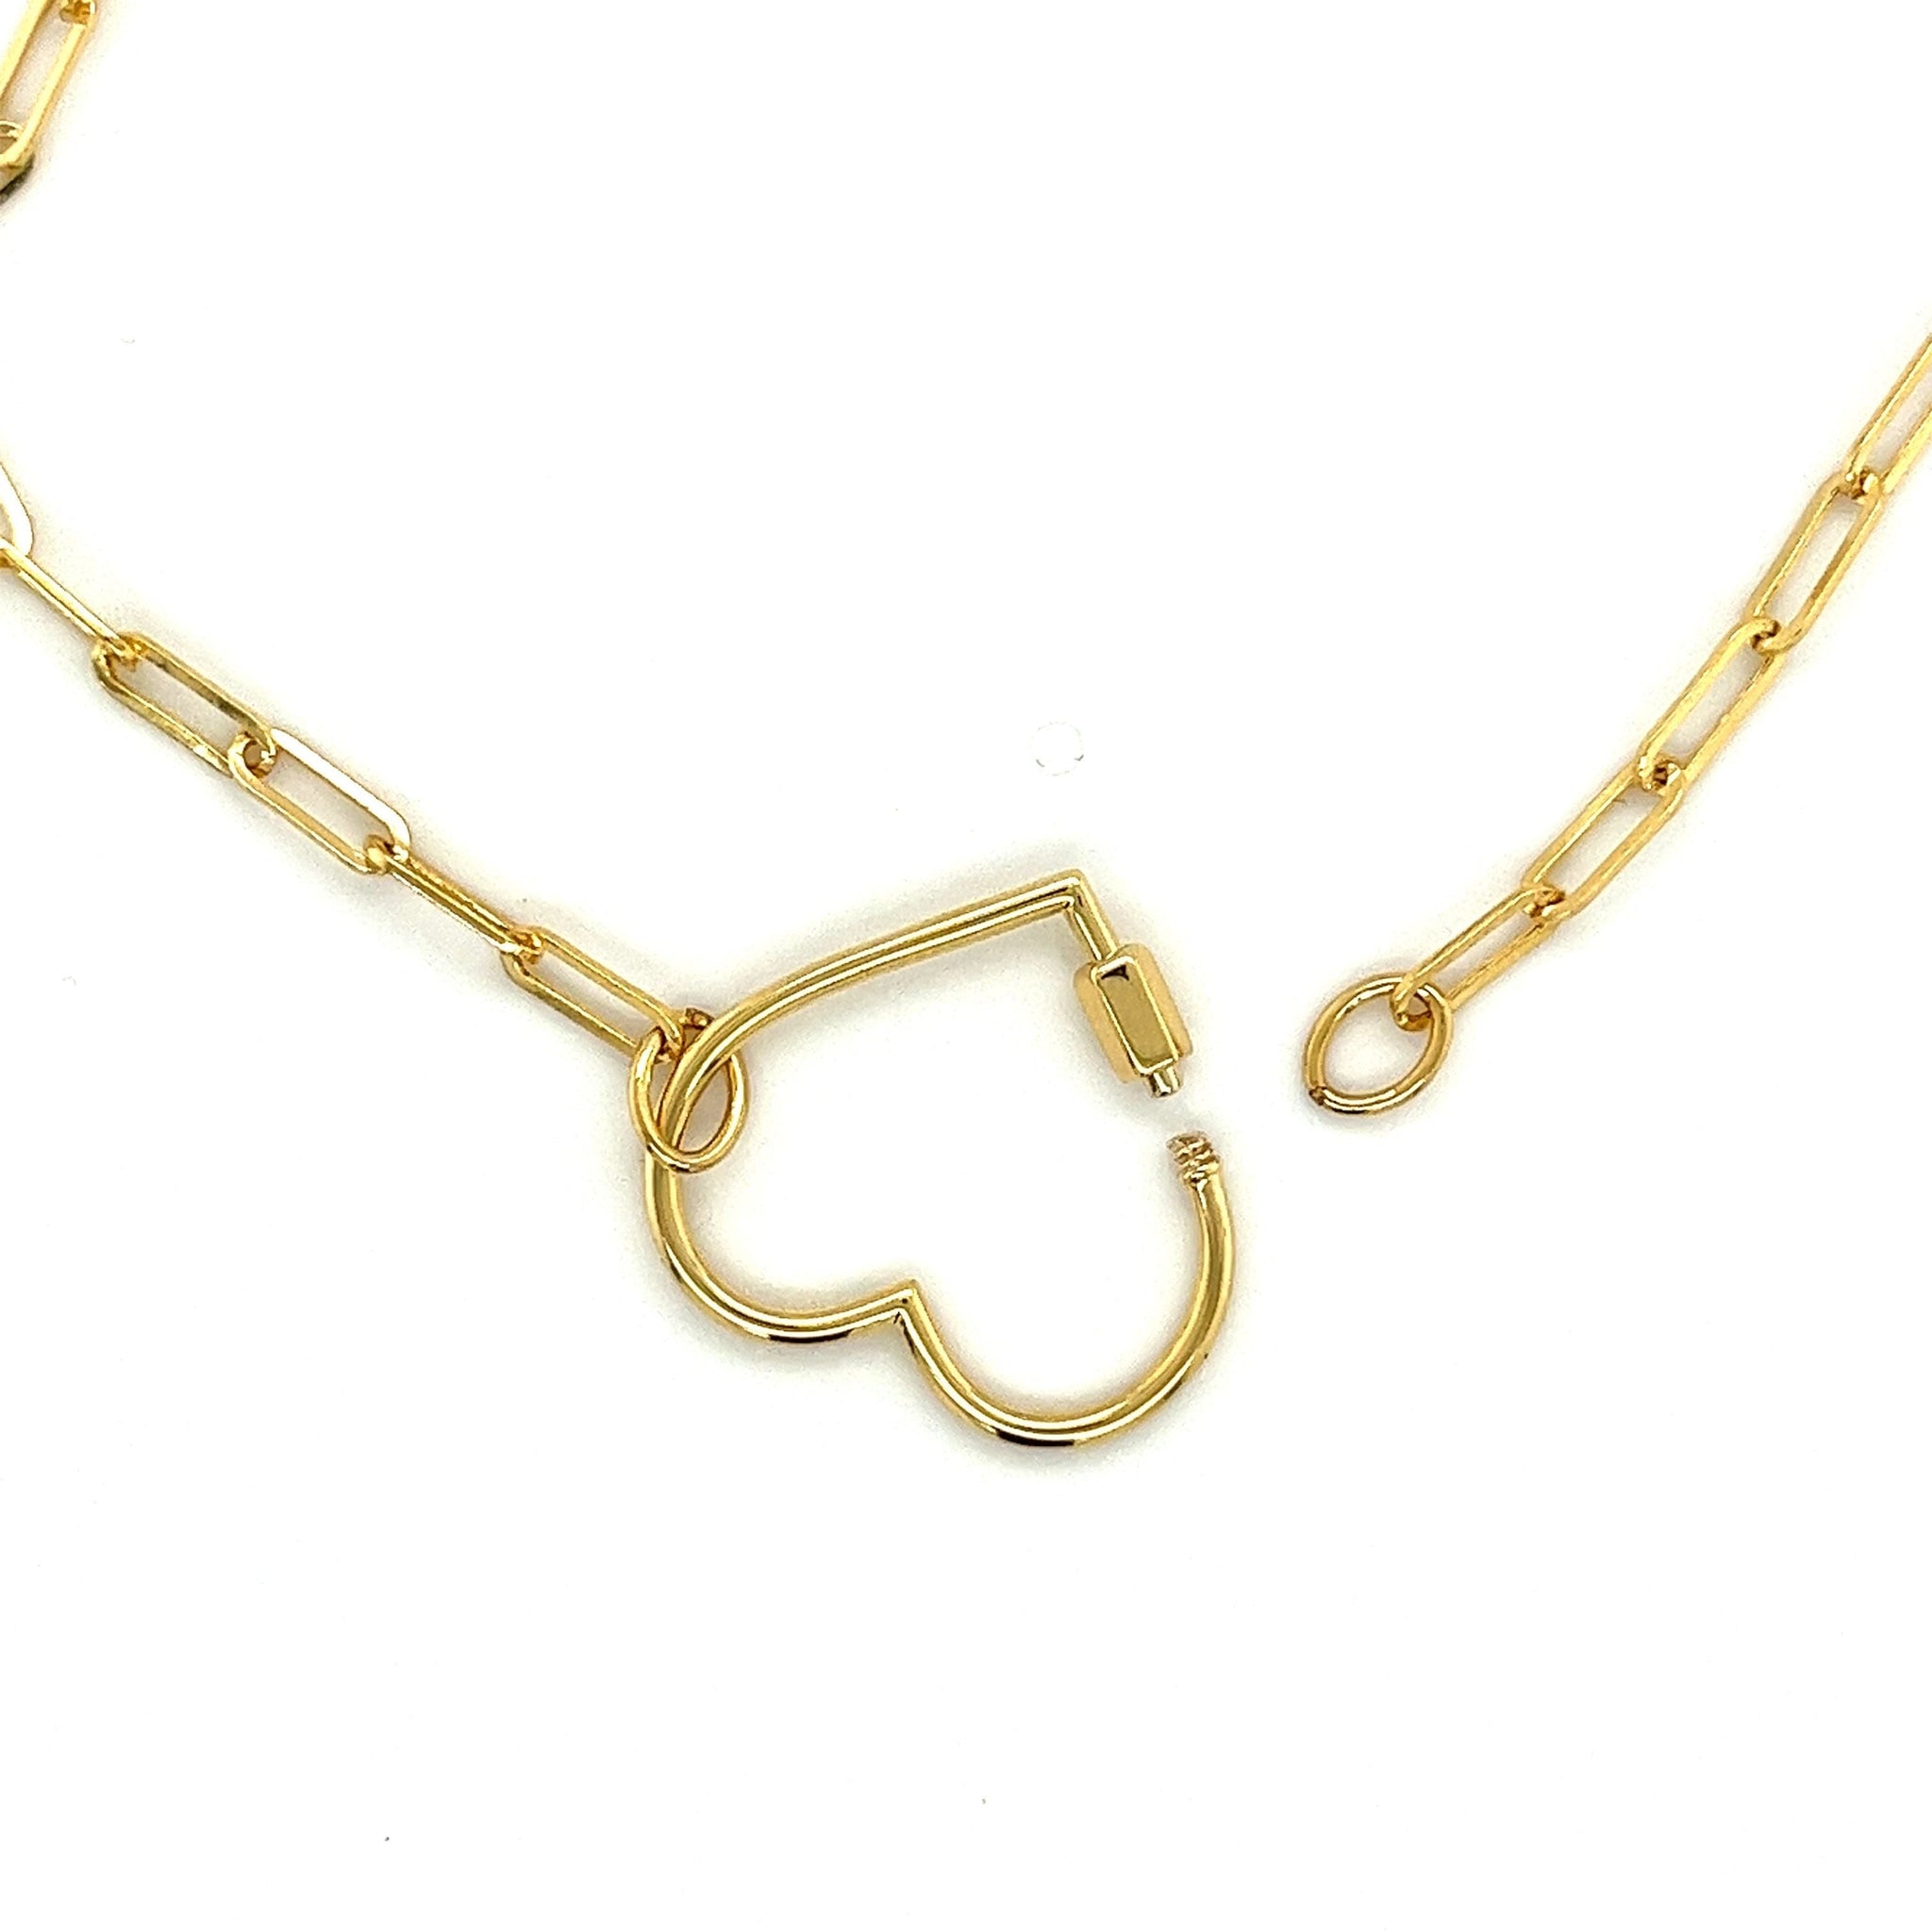 Charm Holder with Gold Fill Paper Clip Chain